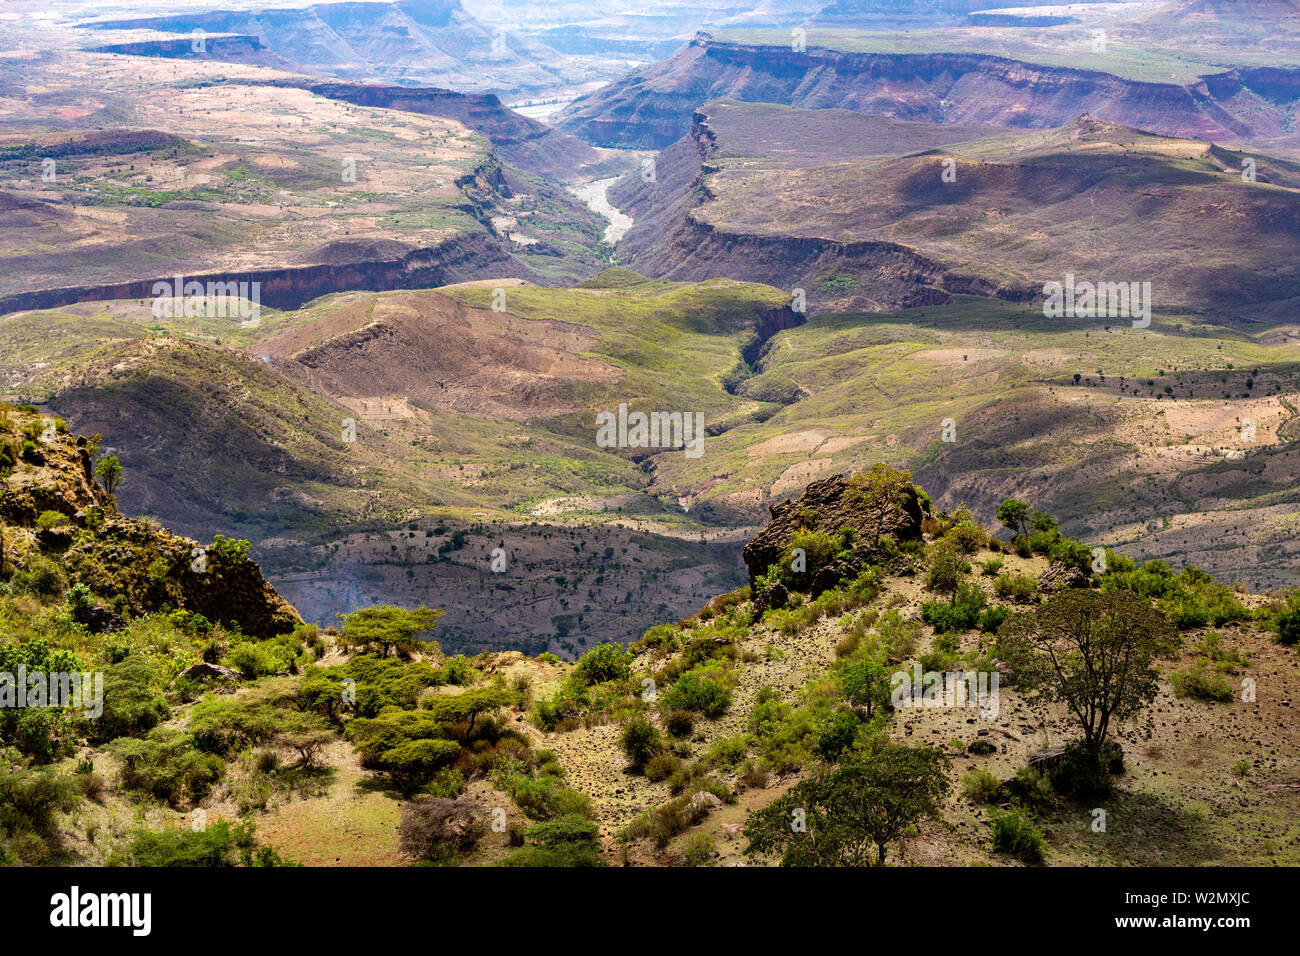 Beautiful mountain landscape with canyon and dry river bed, Somali Region. Ethiopia wilderness landscape, Africa. Stock Photo